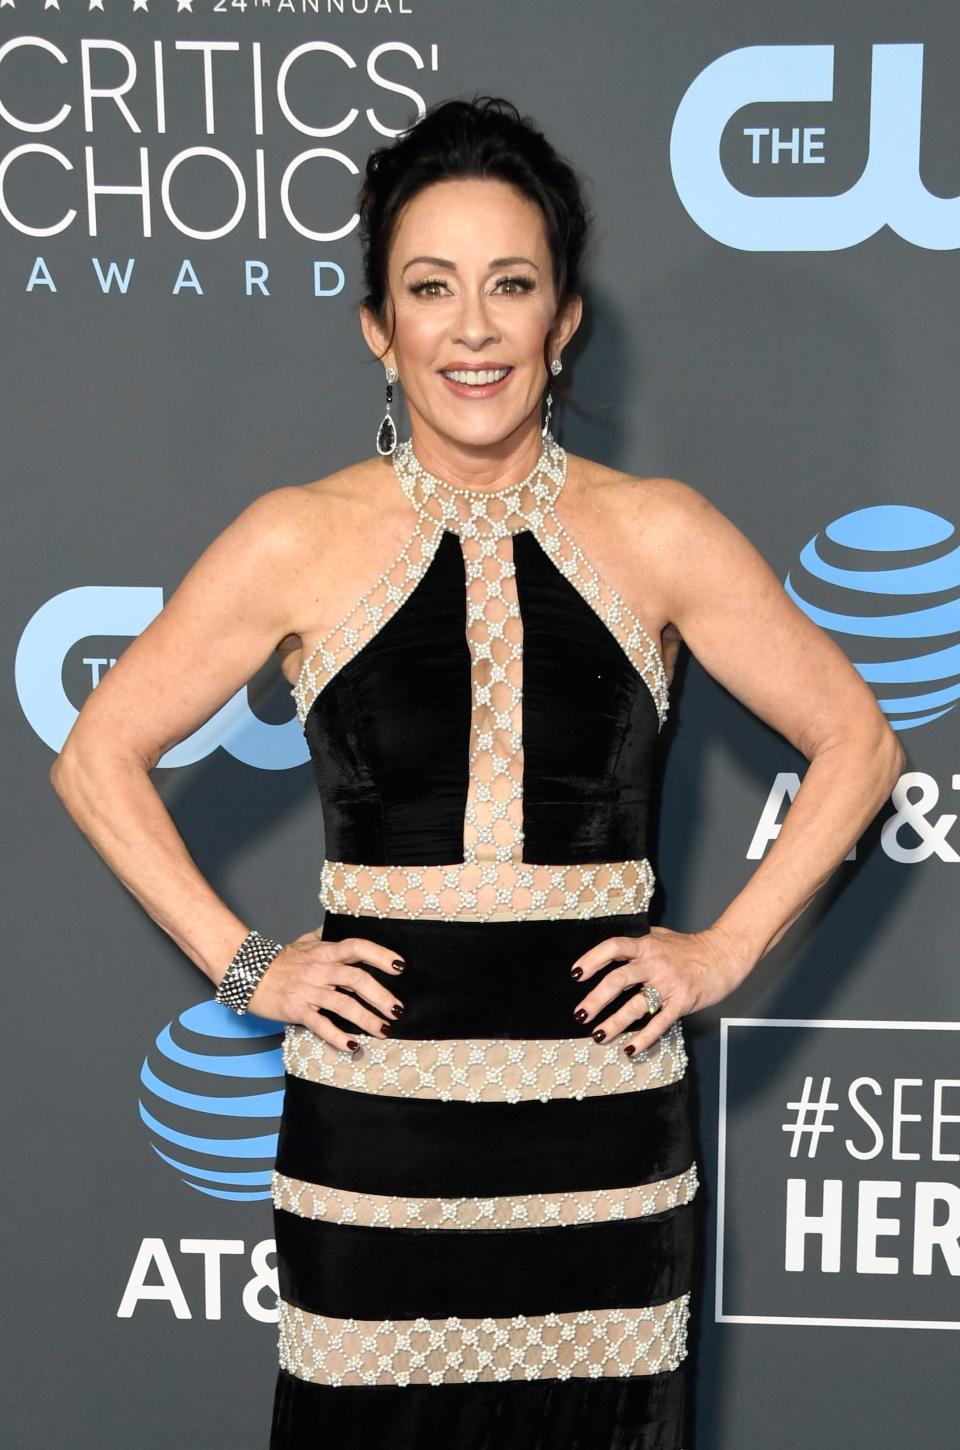 Patricia Heaton listed off her many accomplishments since turning 50 following Don Lemon's comments about women in their "prime."